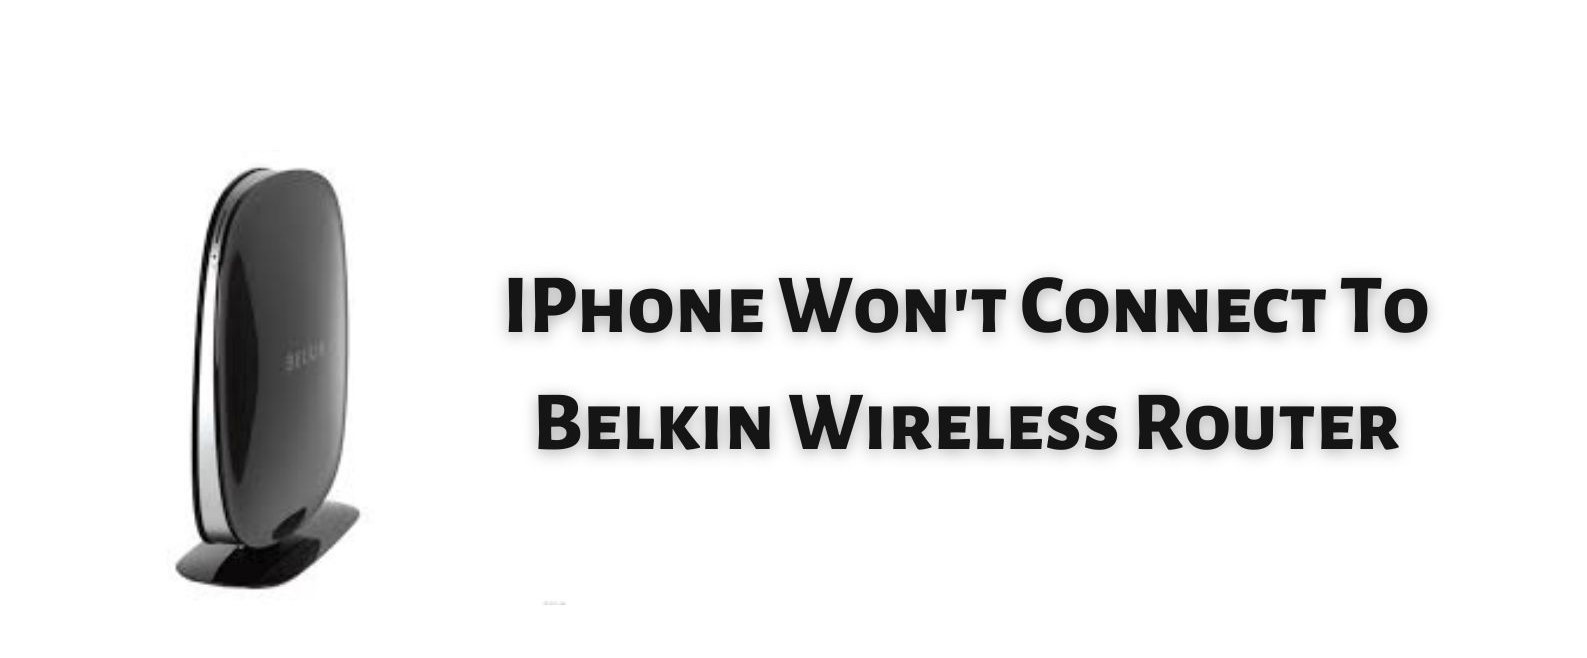 IPhone Won't Connect To Belkin Wireless Router